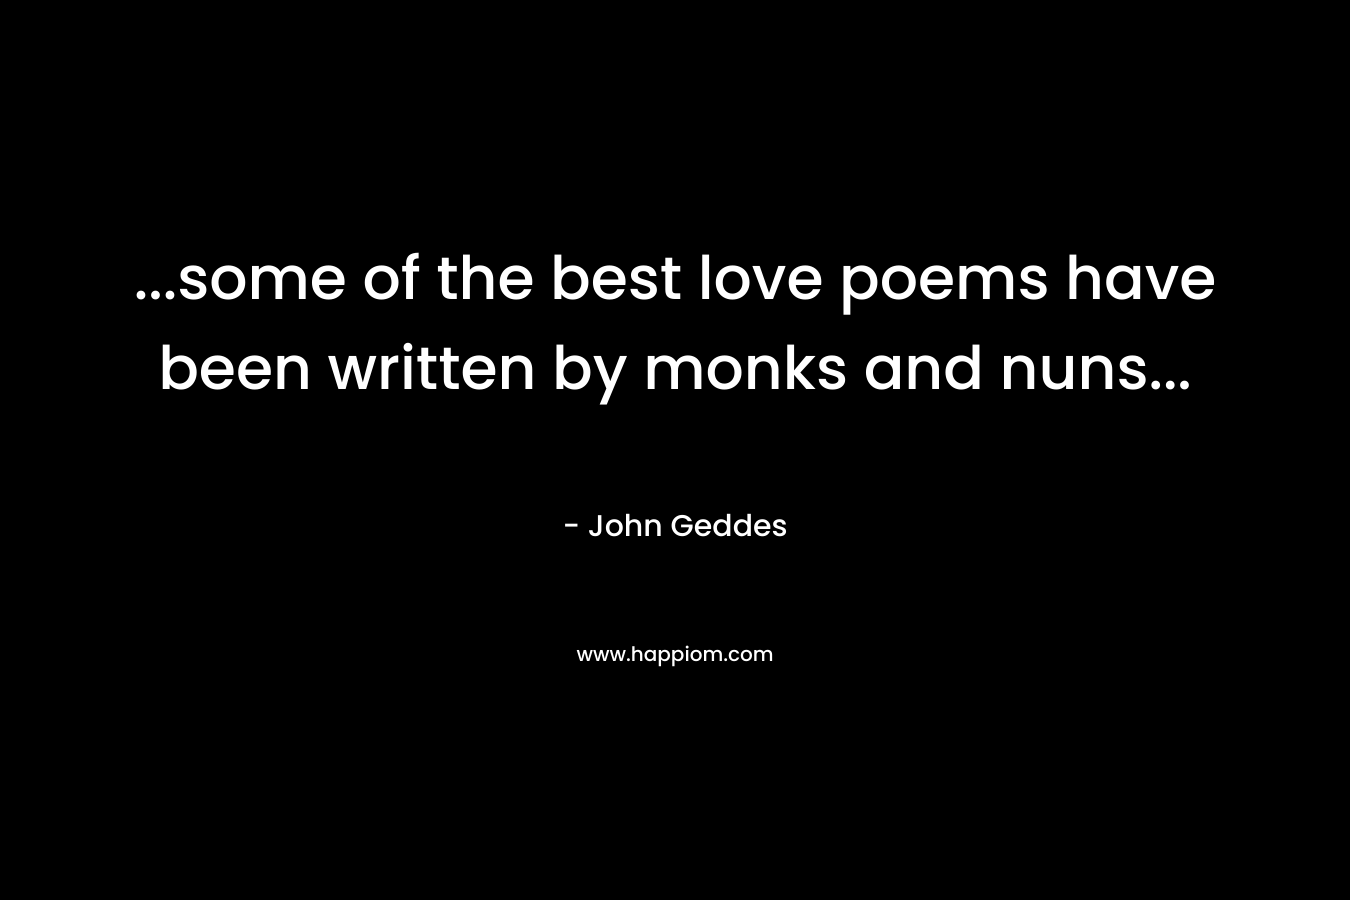 ...some of the best love poems have been written by monks and nuns...